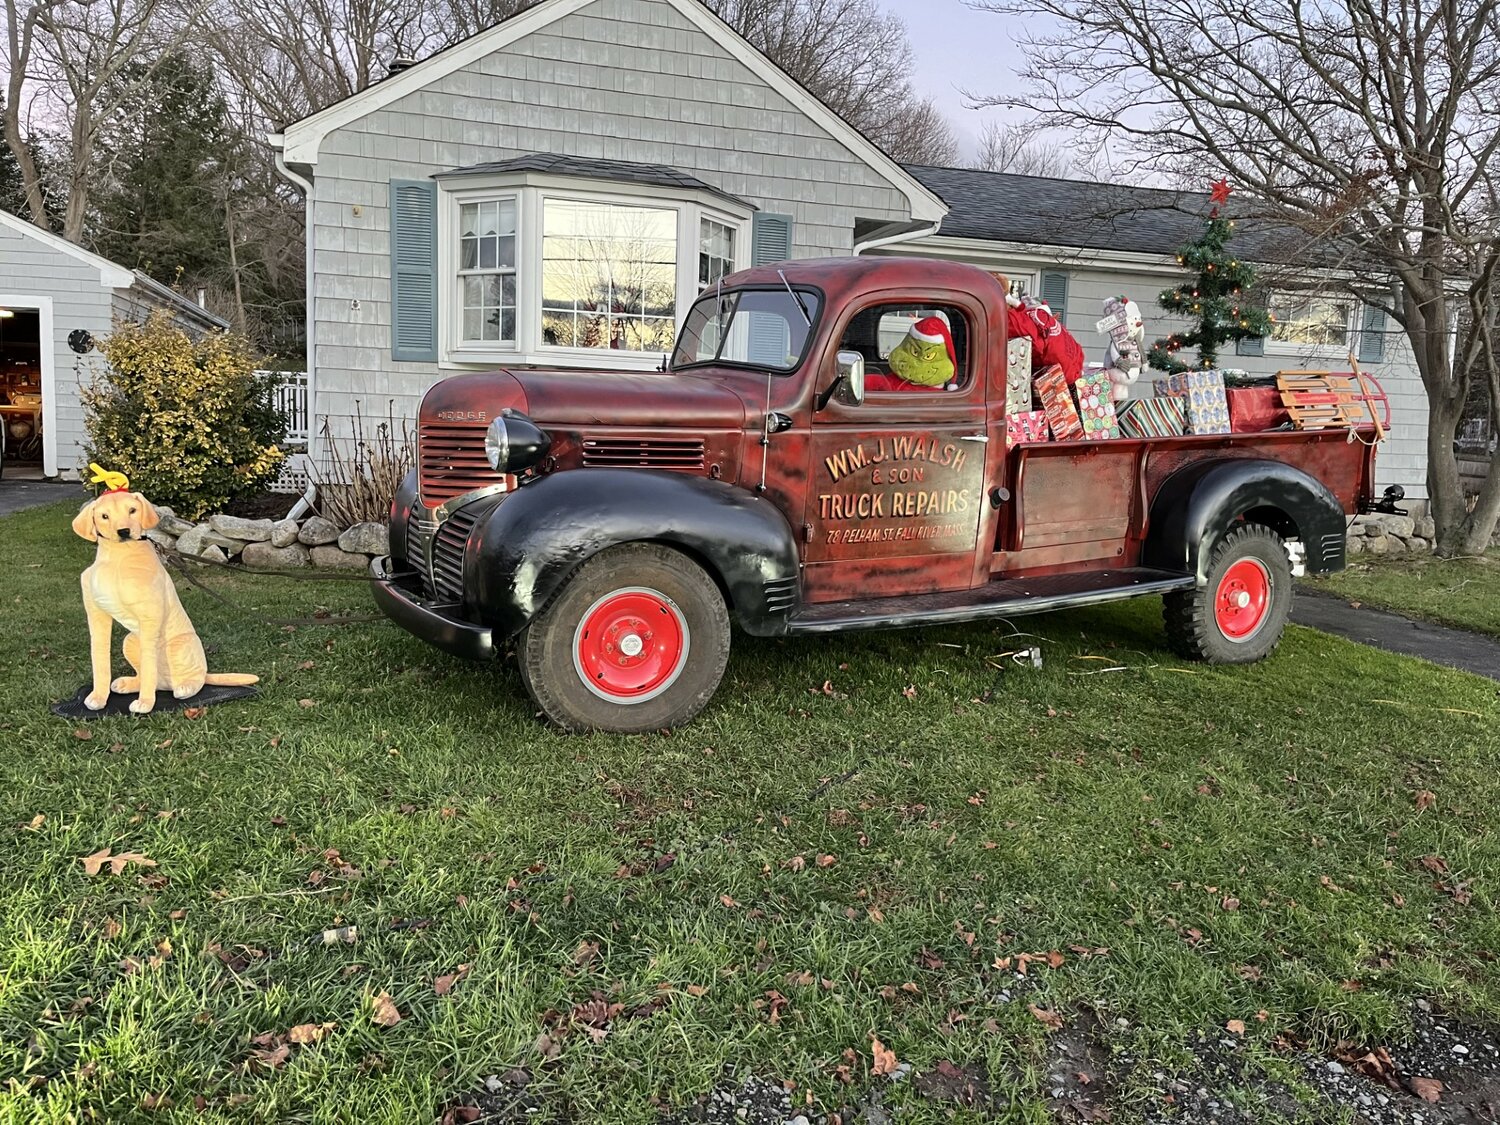 The Grinch arrives in style in a 1939 Dodge on Foxhill Ave in